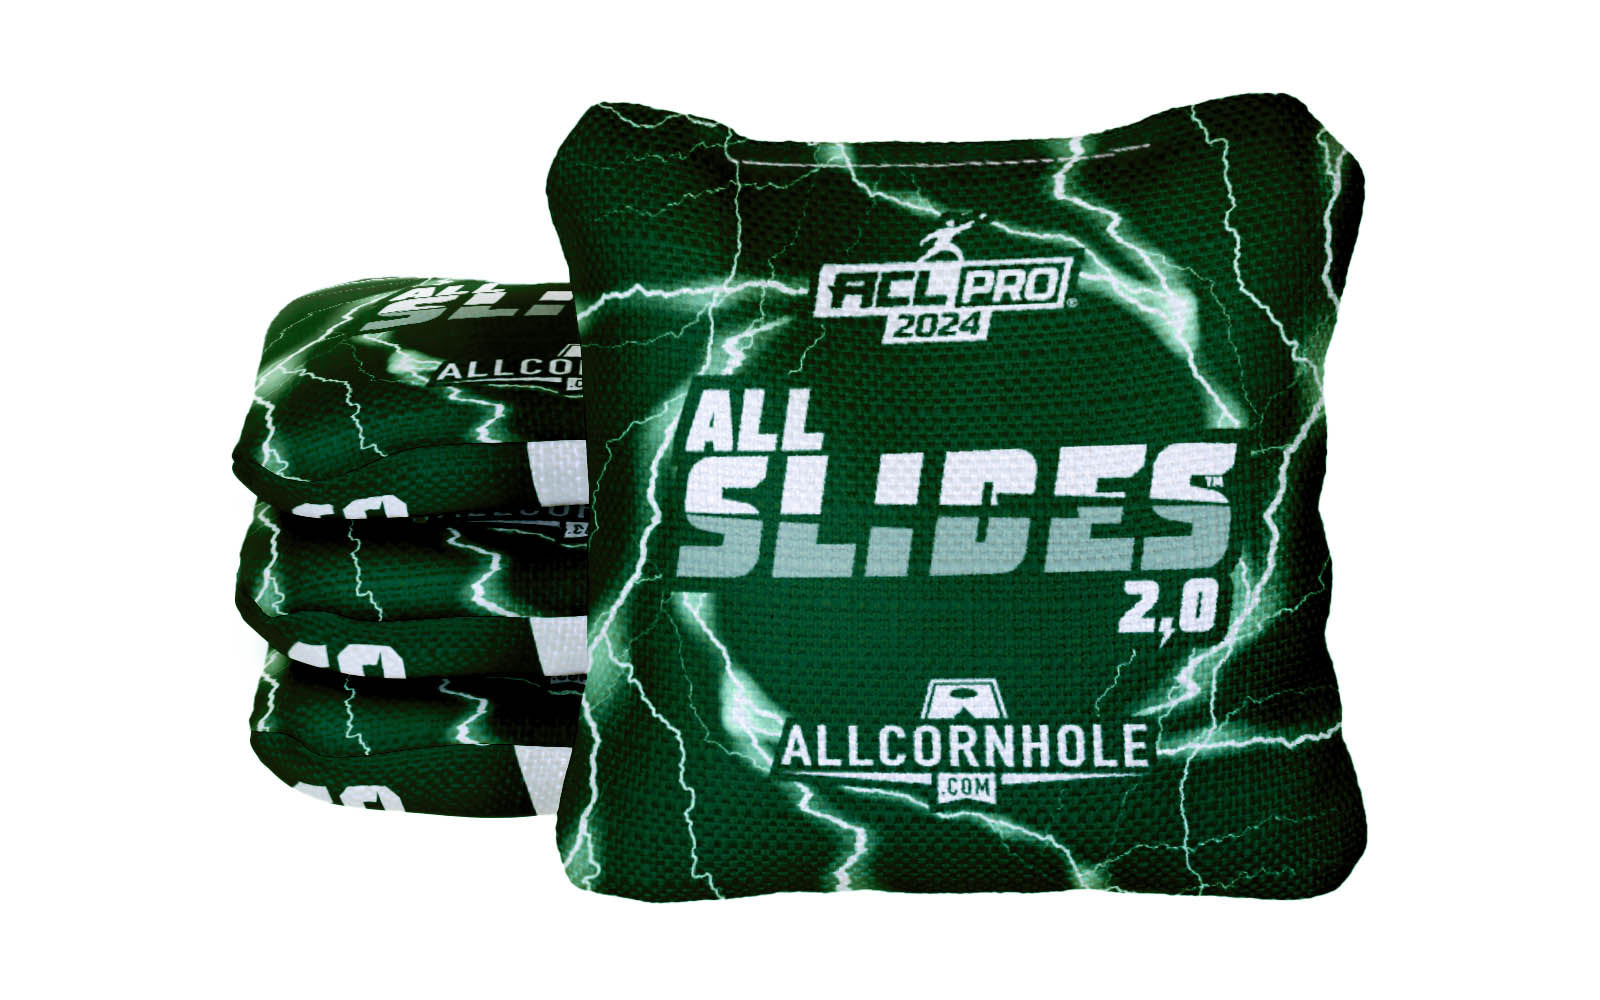 Officially Licensed Collegiate Cornhole Bags - All-Slide 2.0 - Set of 4 - Michigan State University